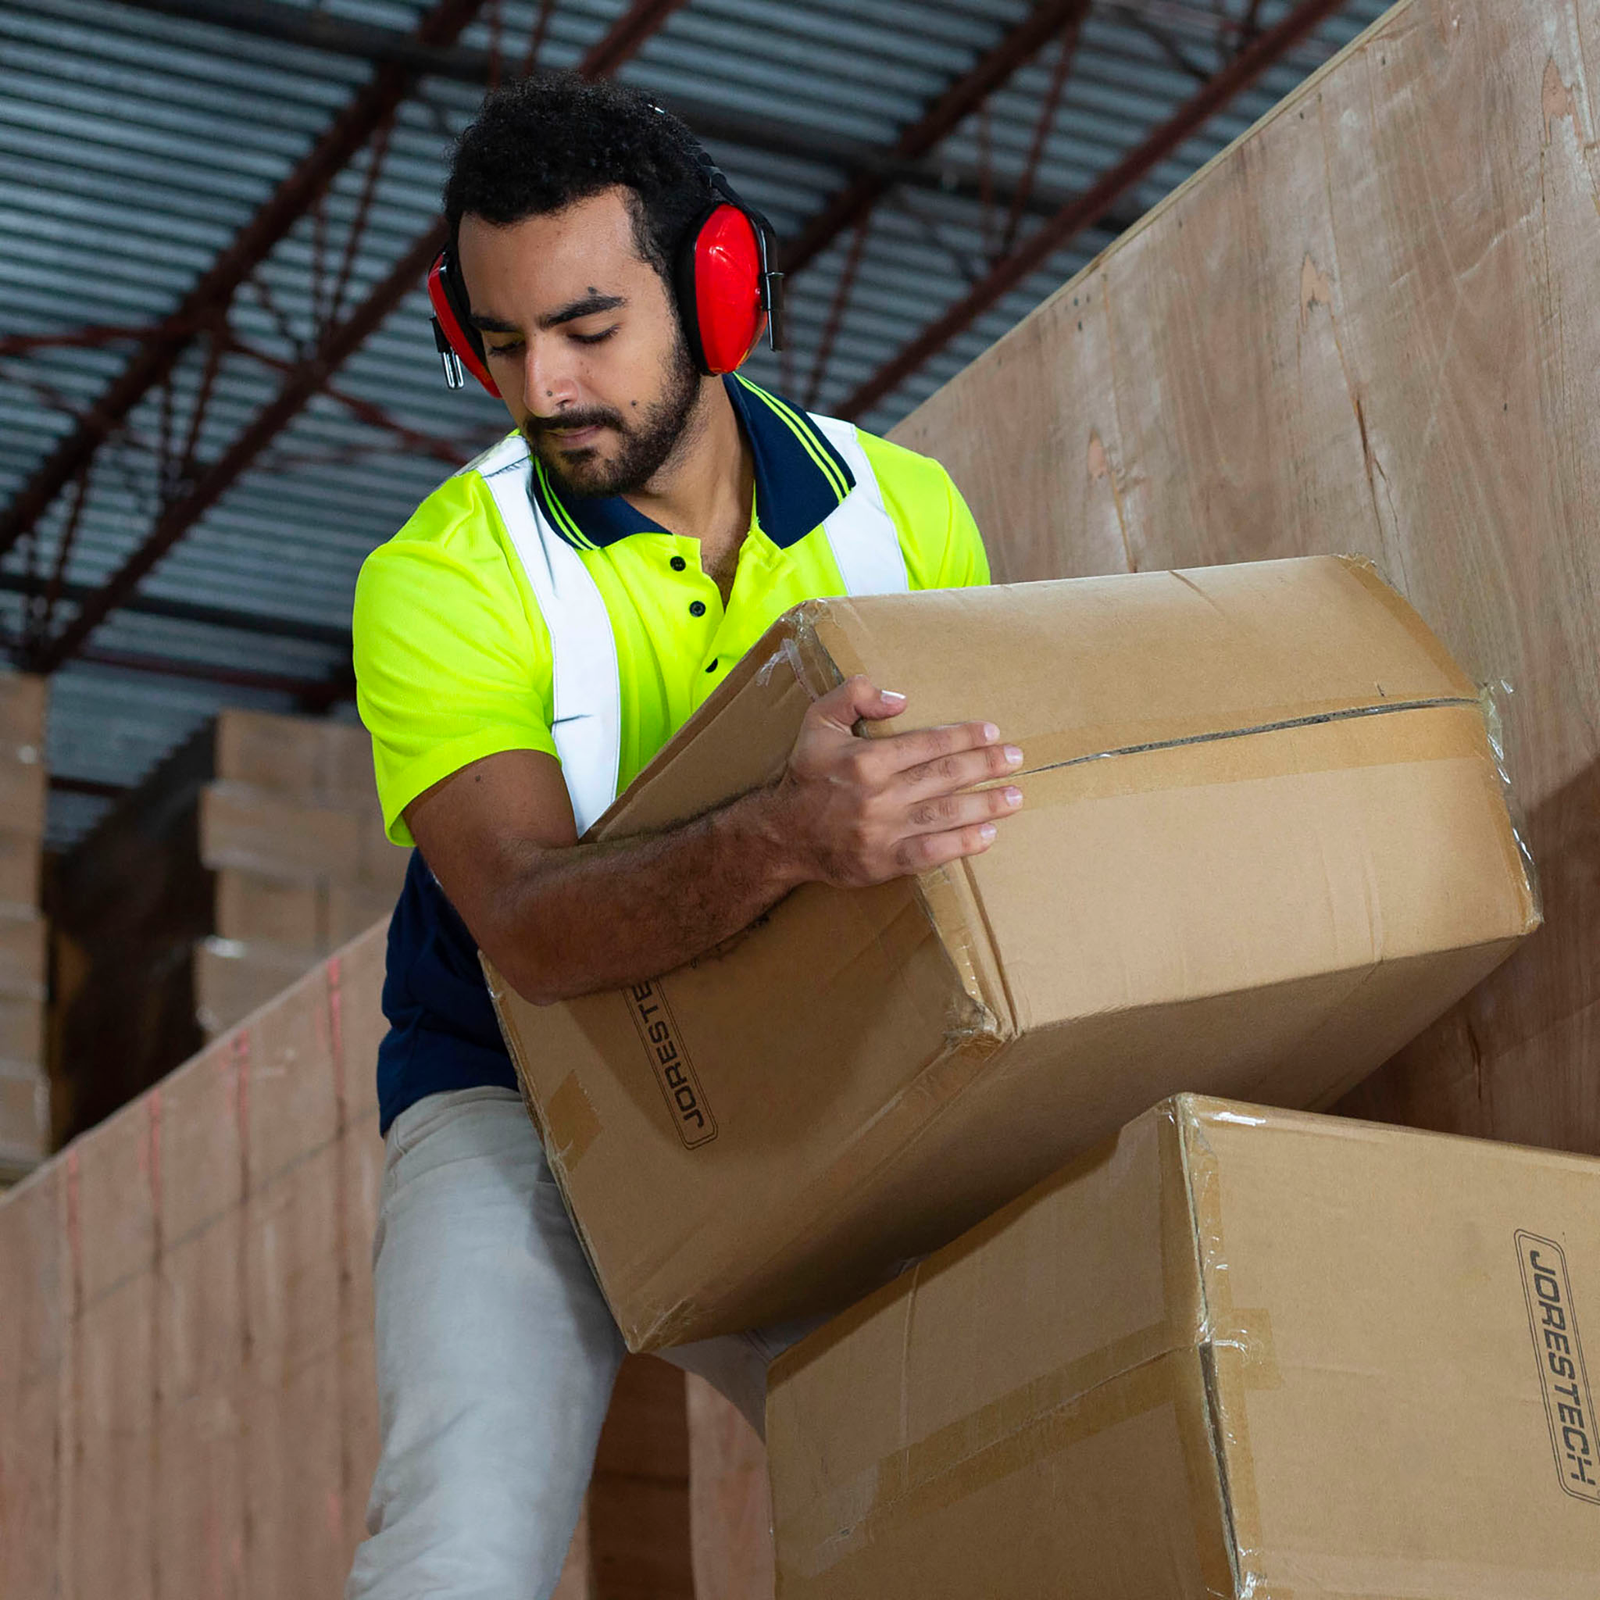 A man  is wearing red JORESTECH ear muffs for noise canceling while carrying boxes in a manufacturer